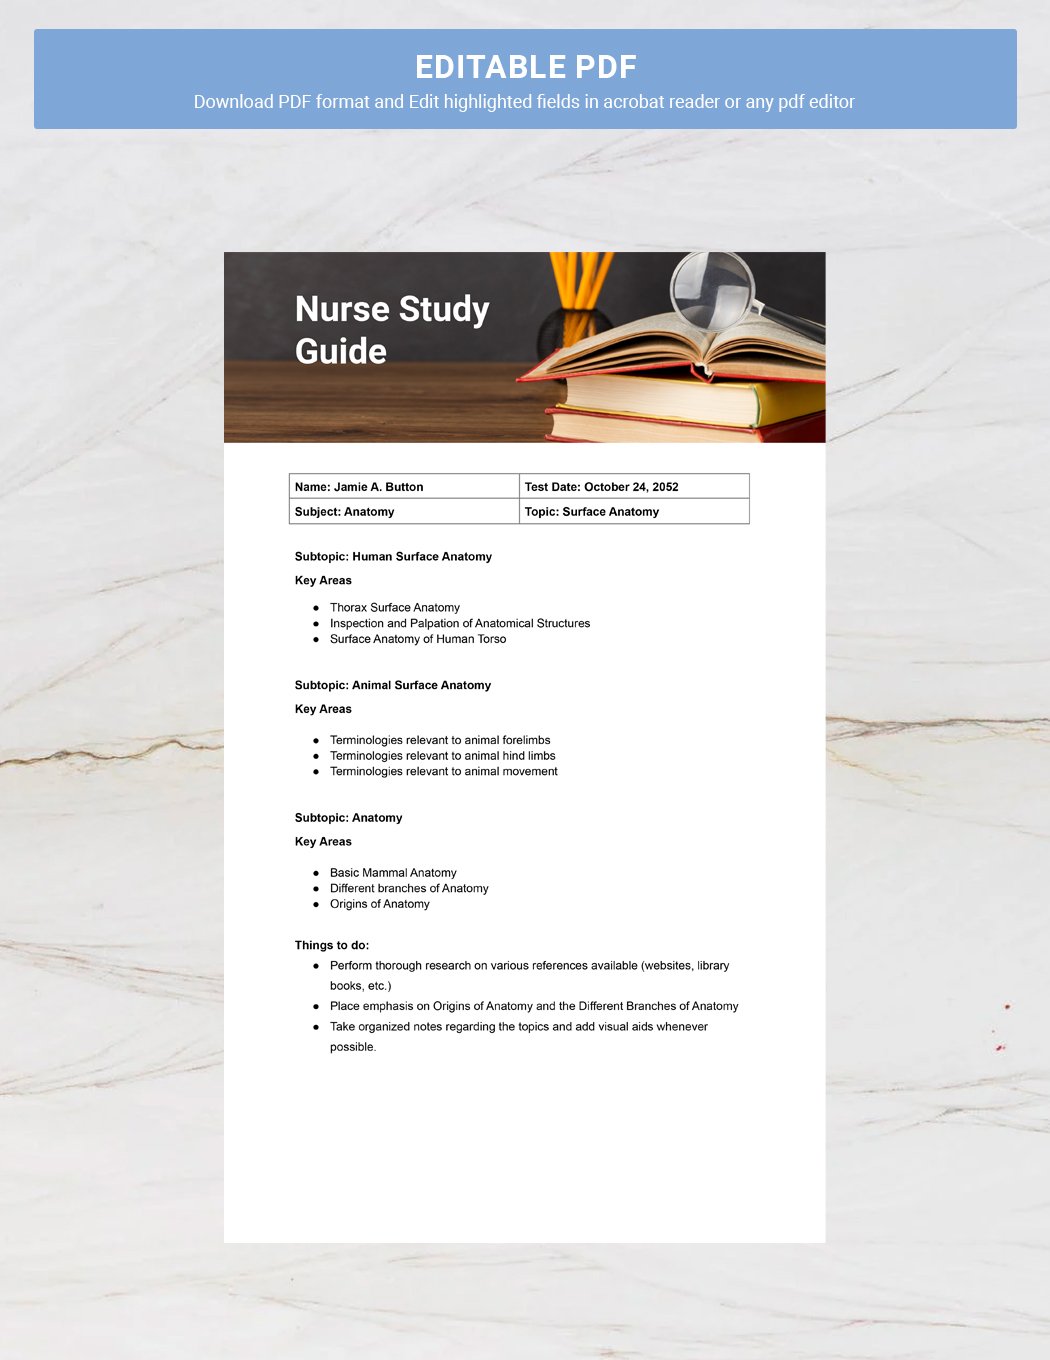 Nurse Study Guide Template Download in Word, Google Docs, Apple Pages